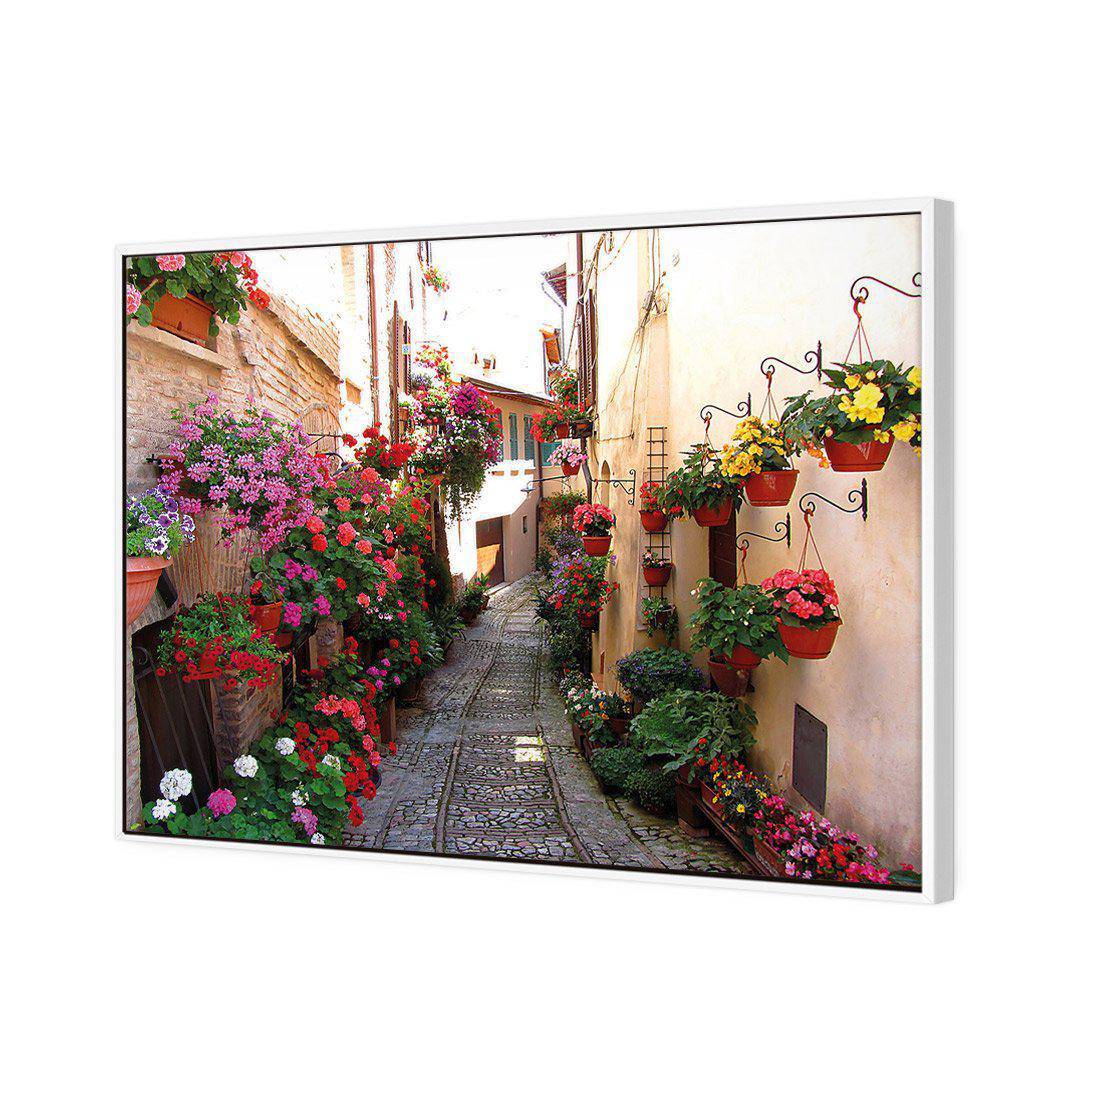 Floral Alley In Italy Canvas Art-Canvas-Wall Art Designs-45x30cm-Canvas - White Frame-Wall Art Designs